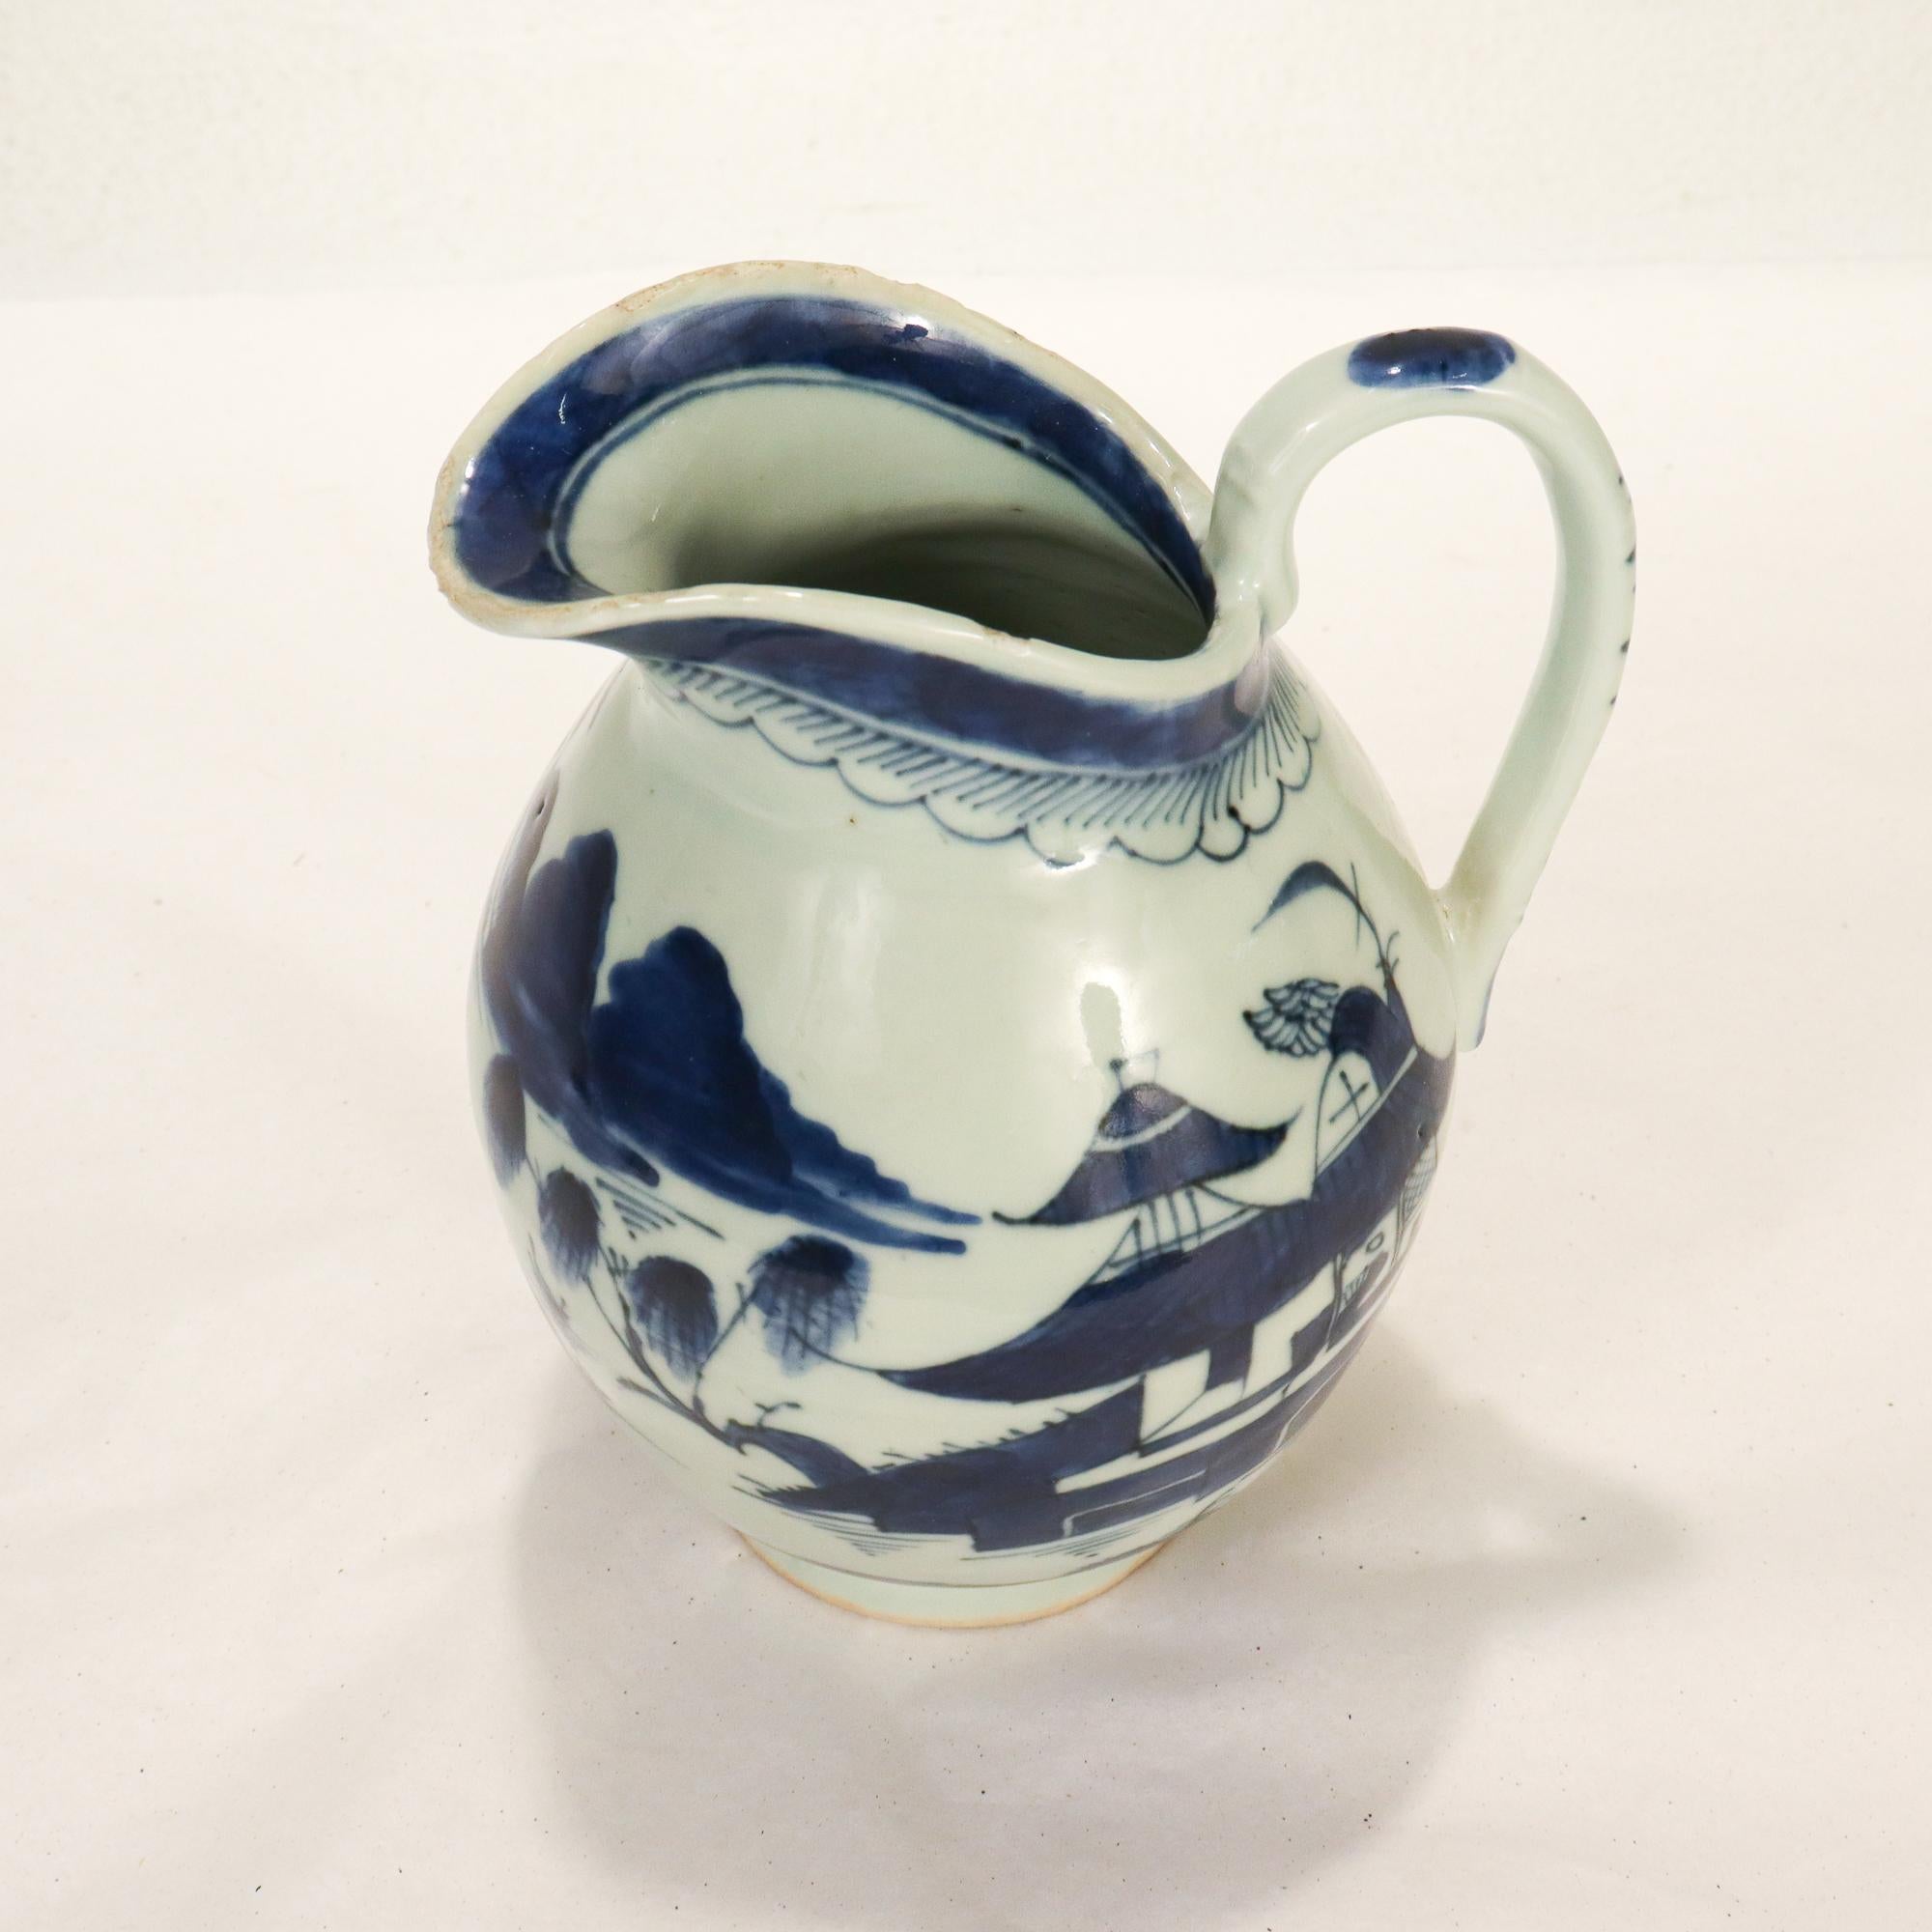 Antique Blue & White Canton Chinese Export Porcelain Pitcher or Jug 3